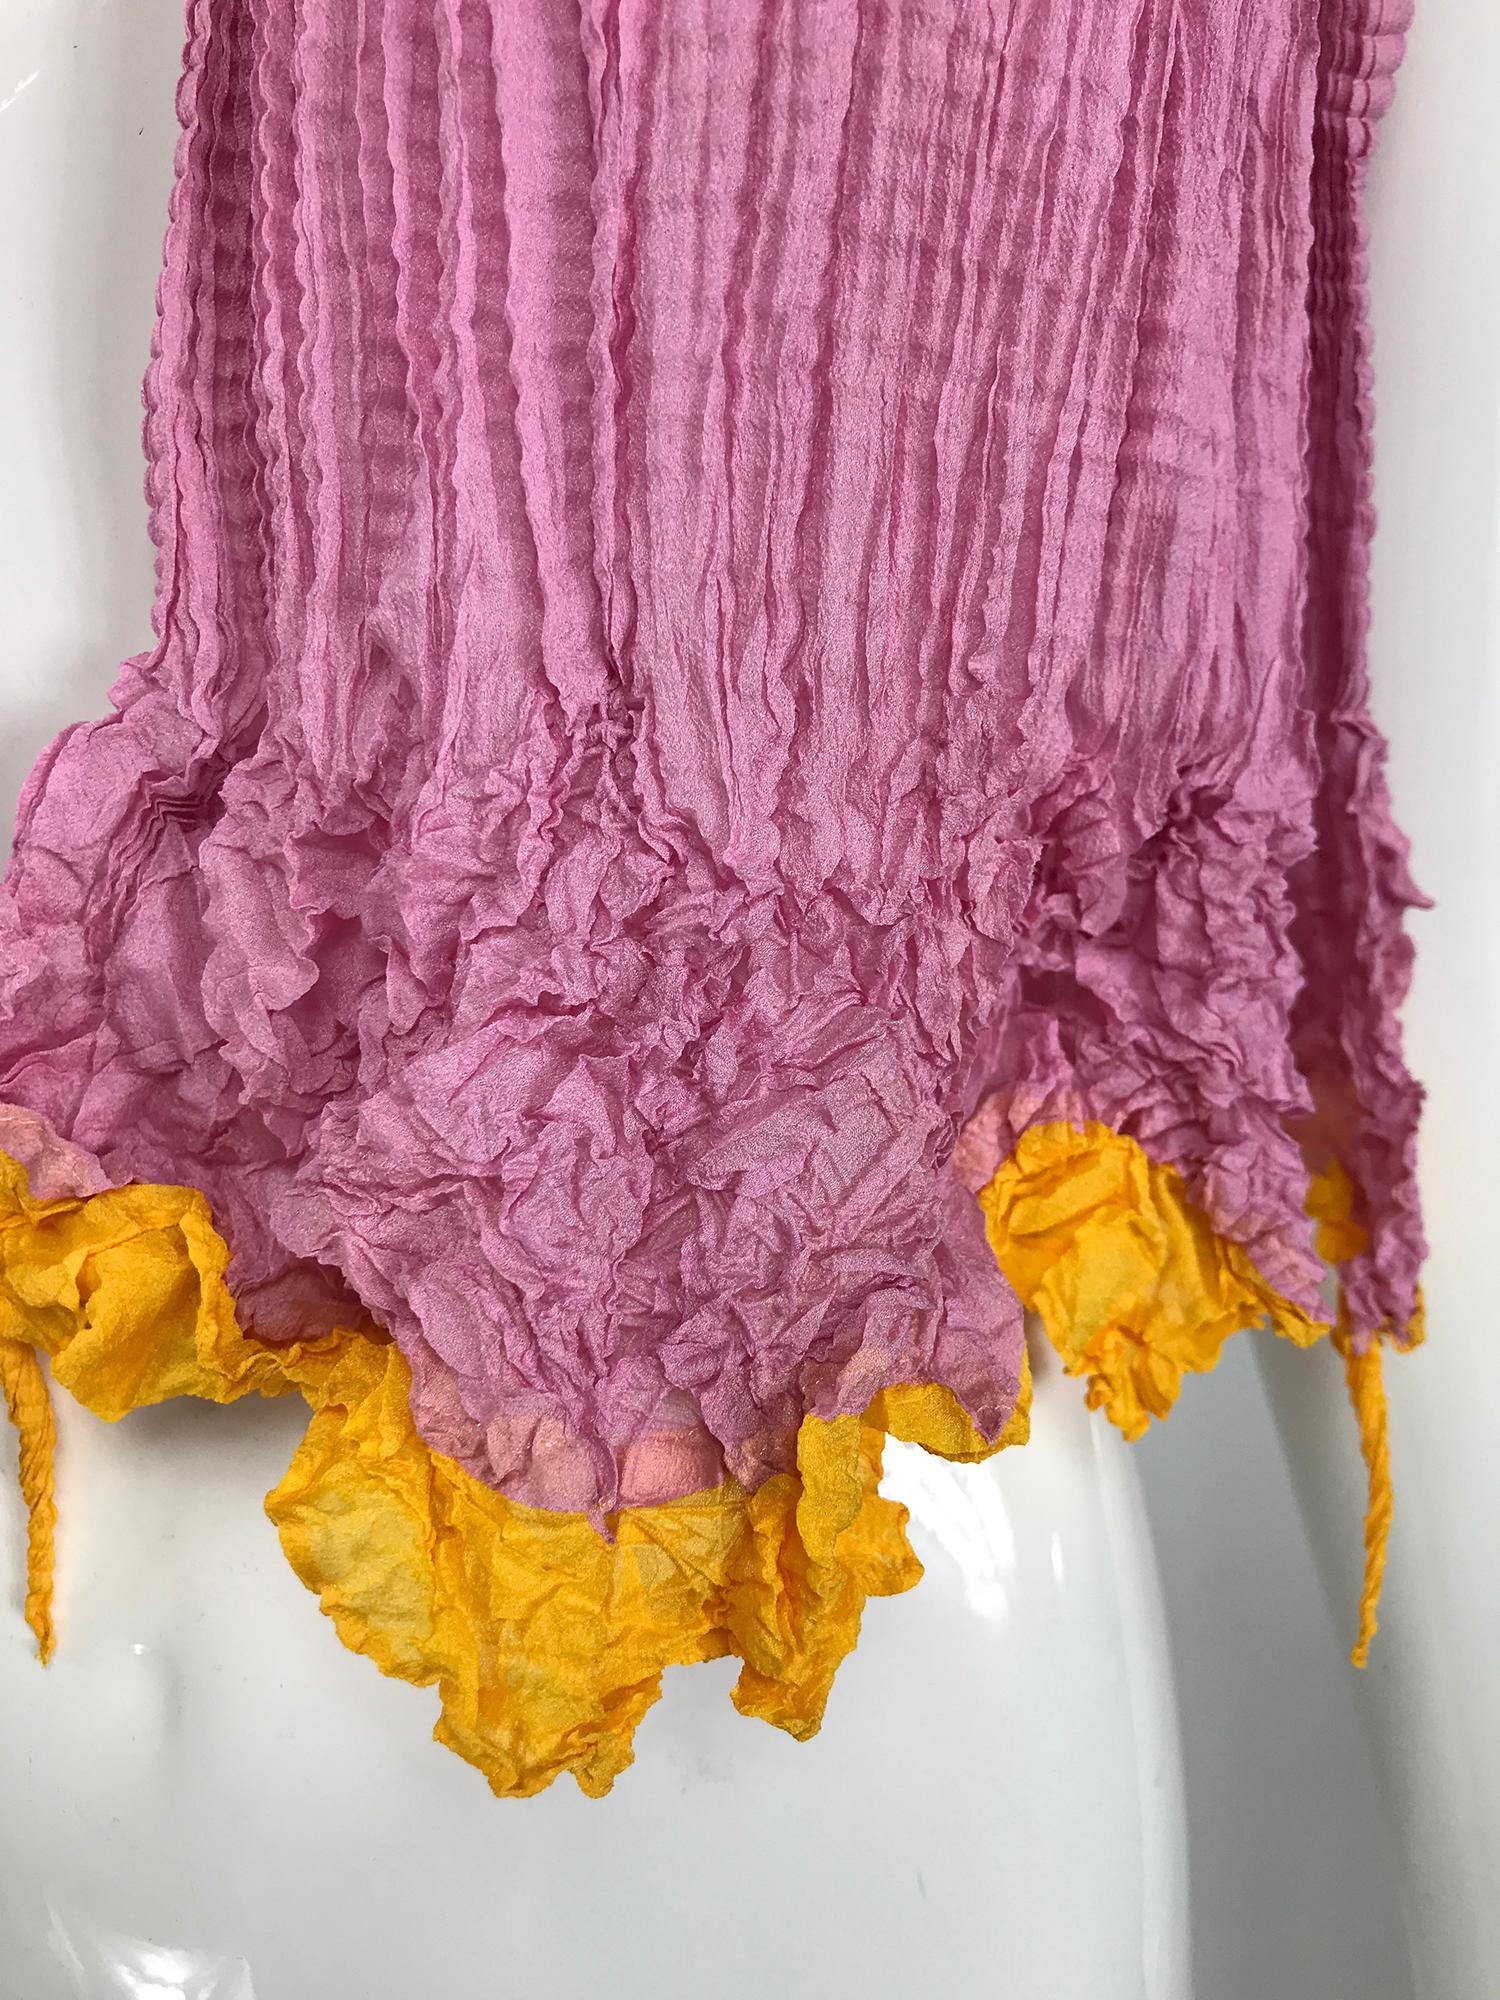 Issey Miyake shibori scarf in bubblegum pink and egg yoke yellow. This is such a great scarf, the colours are very happy. The scarf is crimp pleated, the ends are shape crimped and are very flower-like. In excellent condition, looks